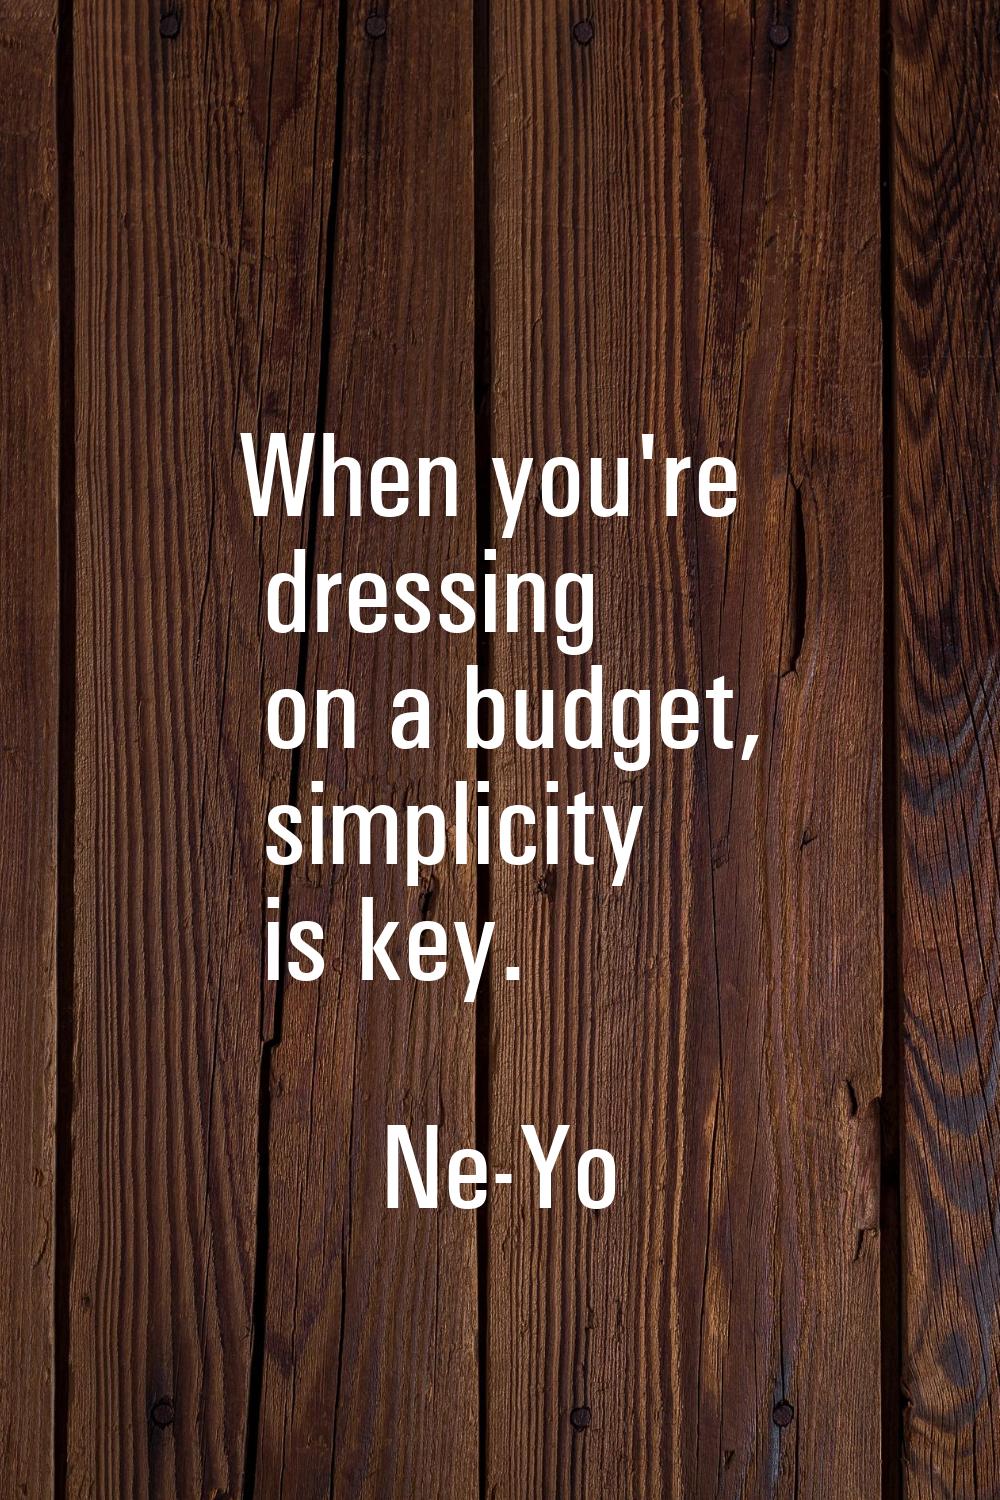 When you're dressing on a budget, simplicity is key.